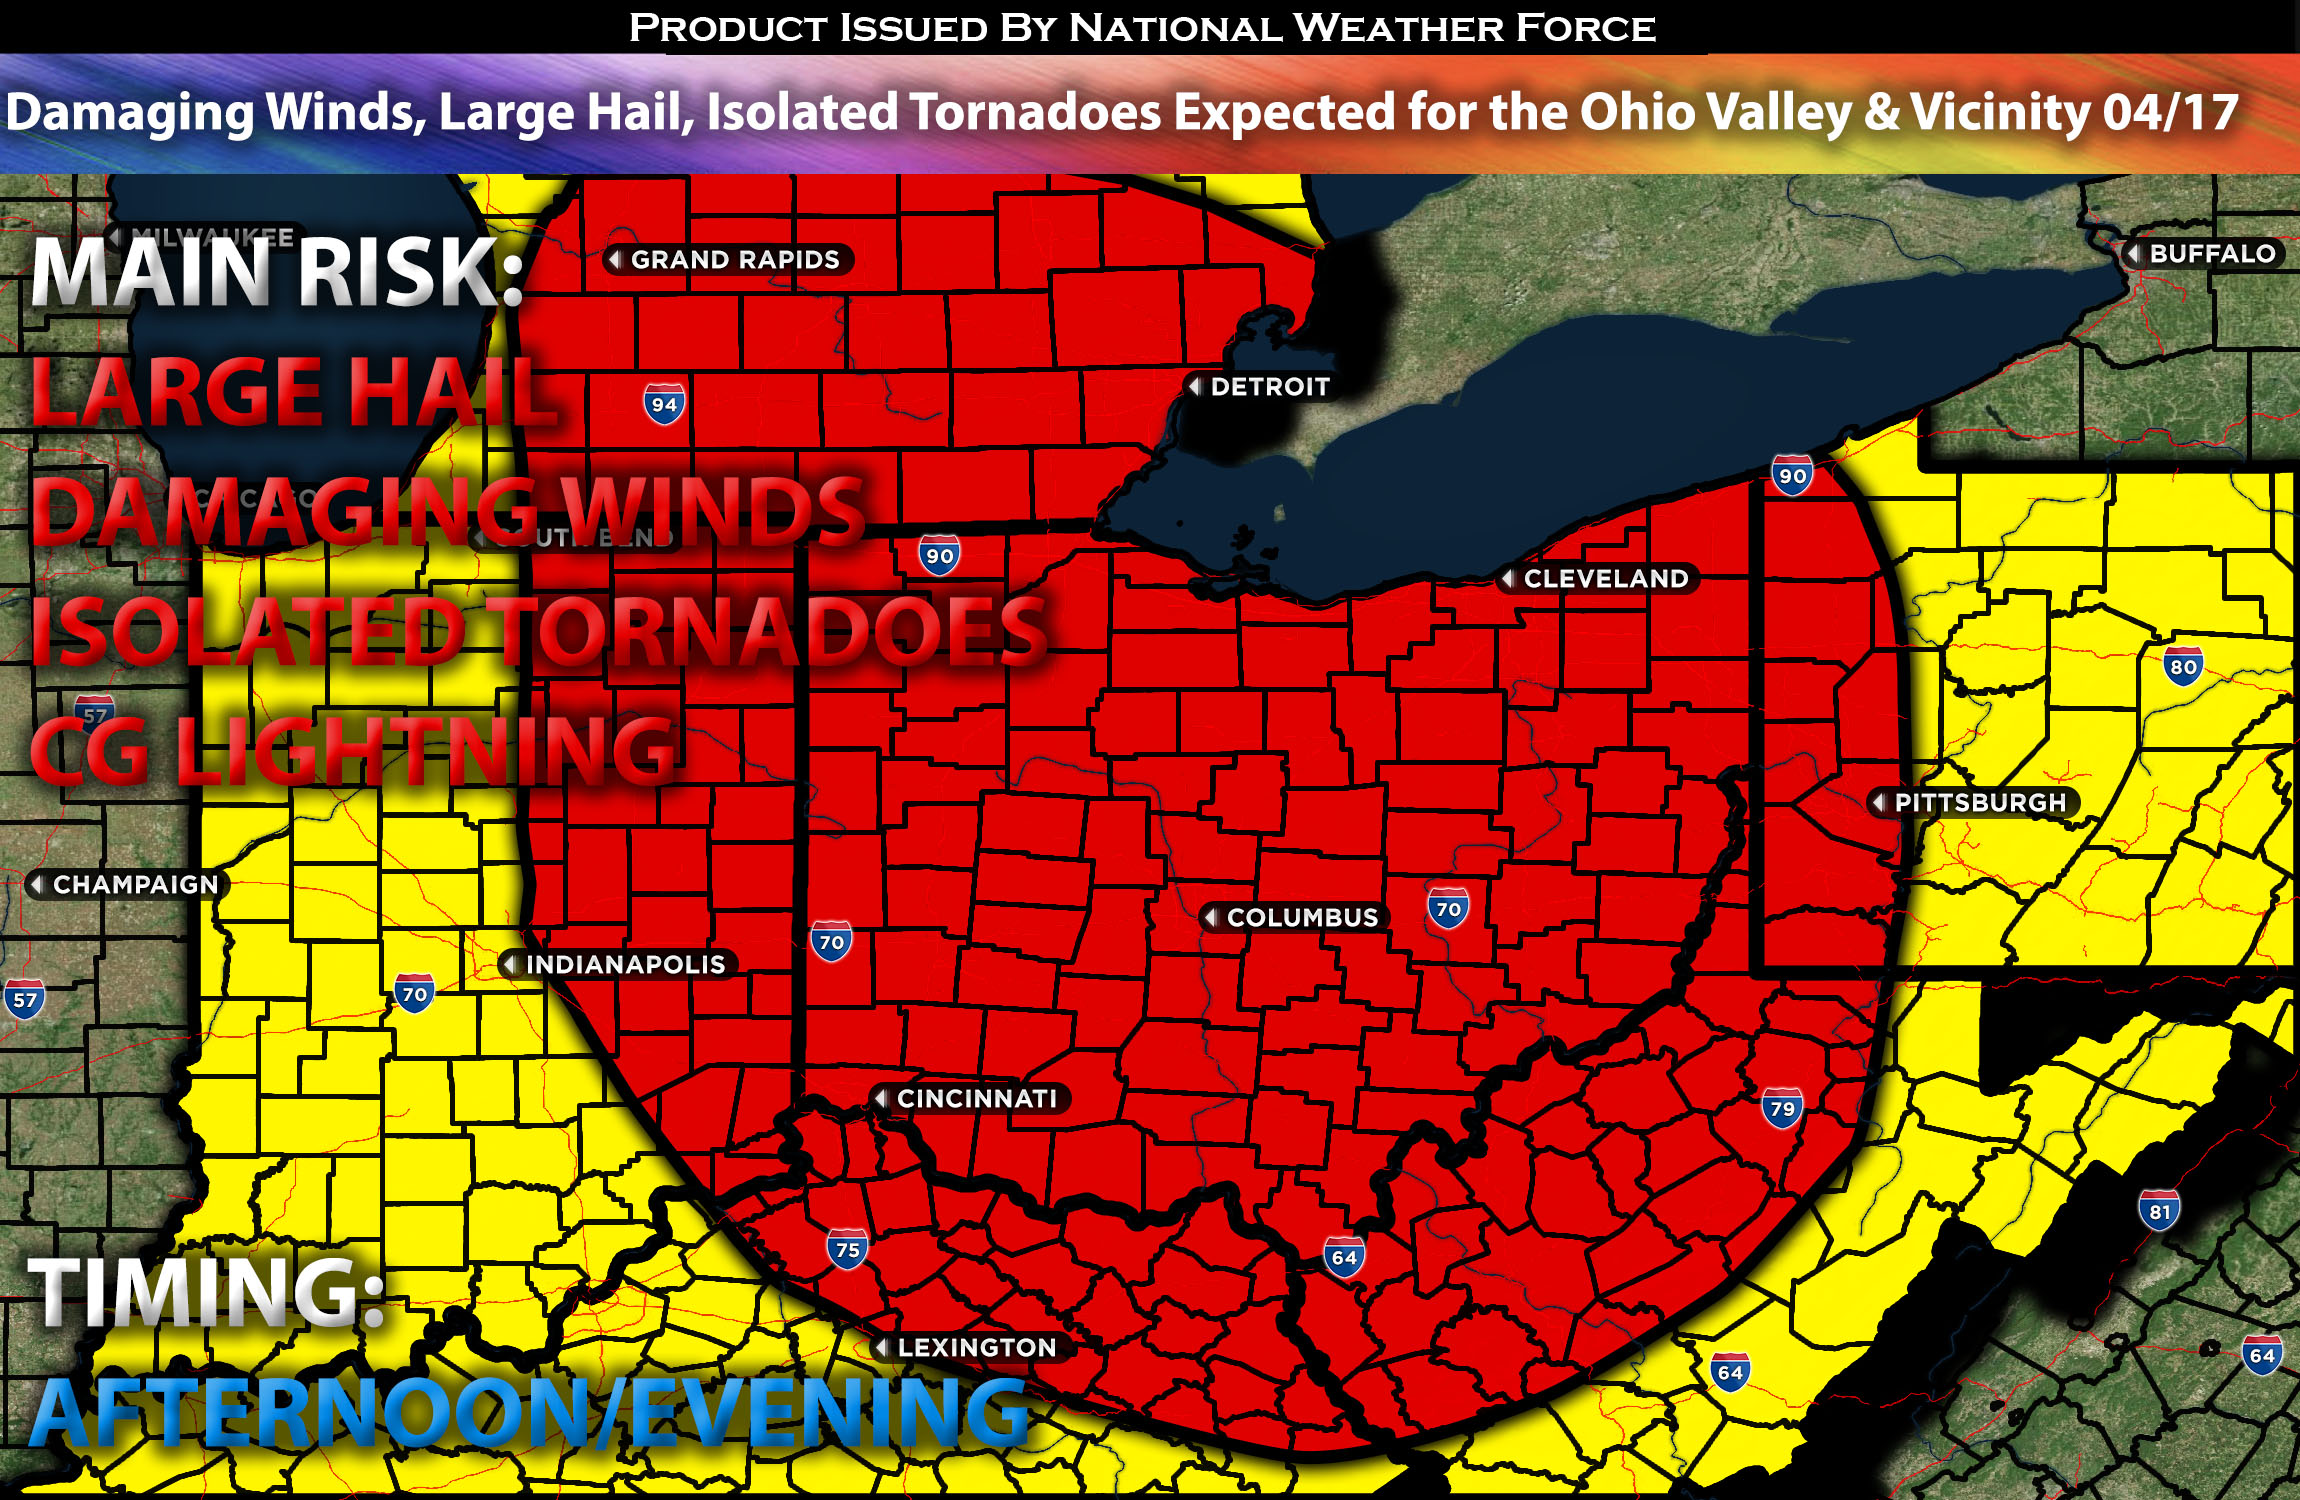 Damaging Winds, Large Hail, Isolated Tornadoes Expected for the Ohio Valley & Vicinity on April 17th